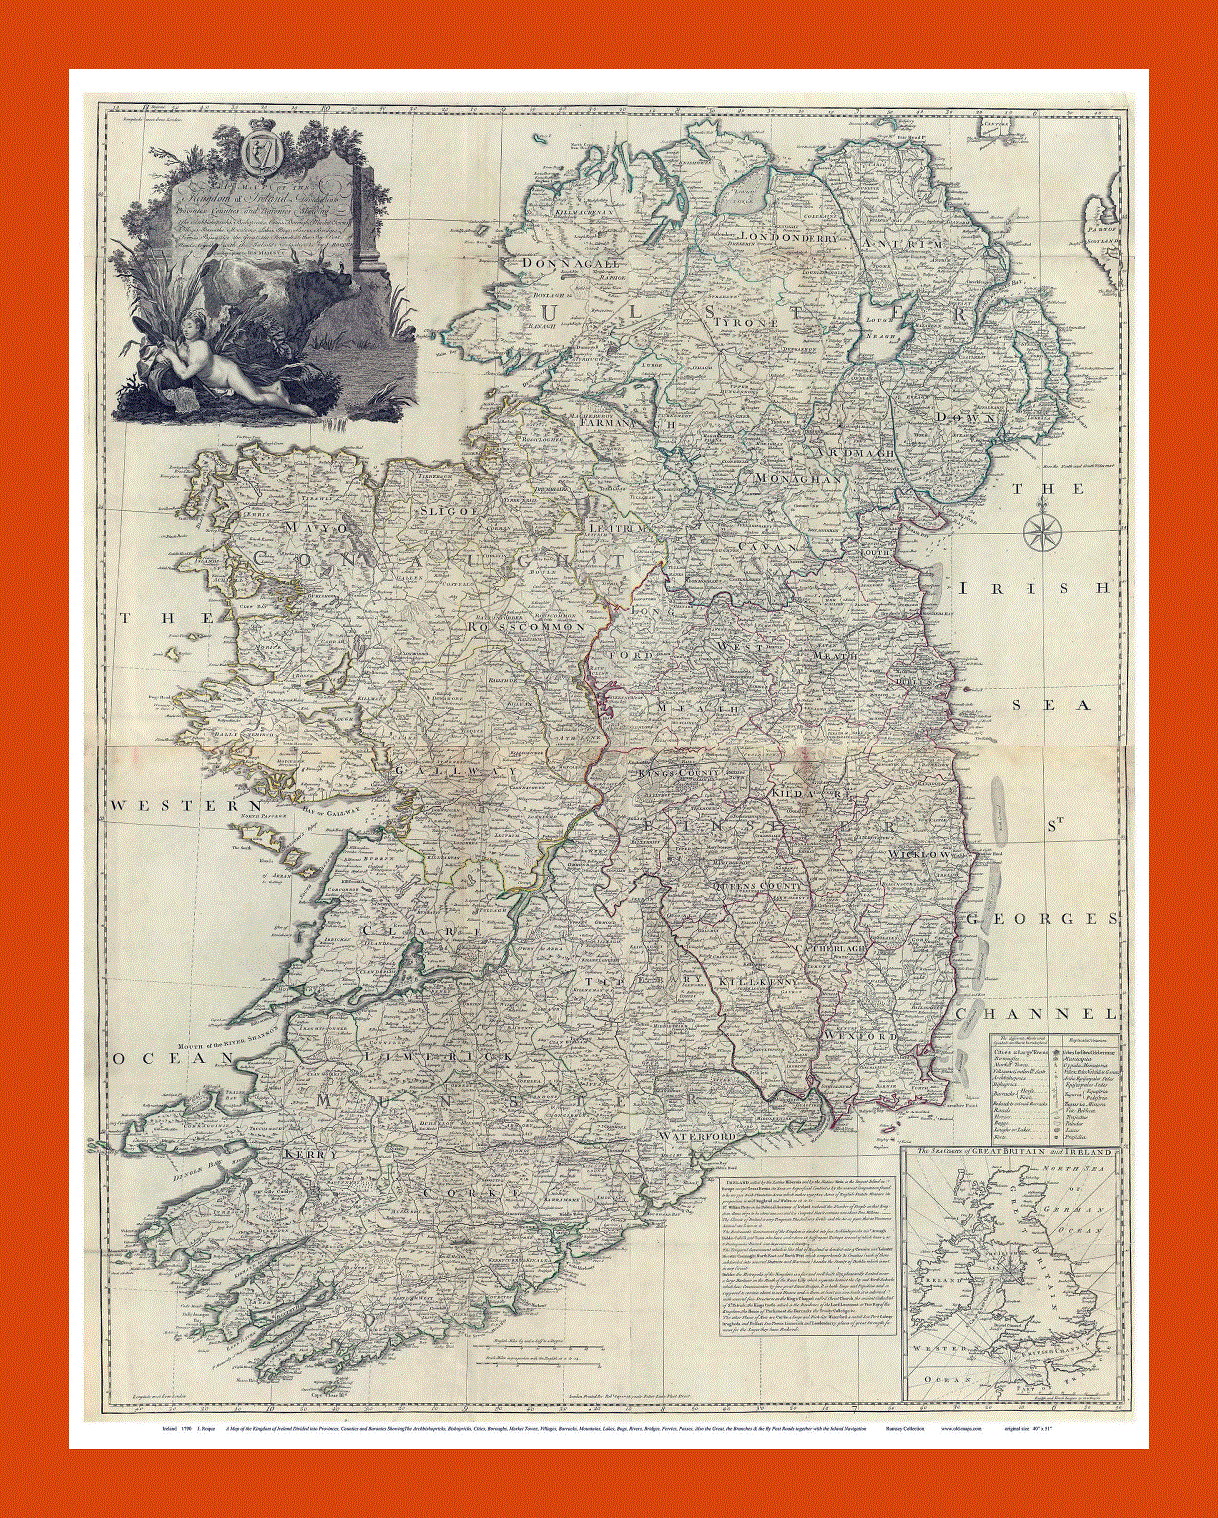 Old map of Ireland - 1790